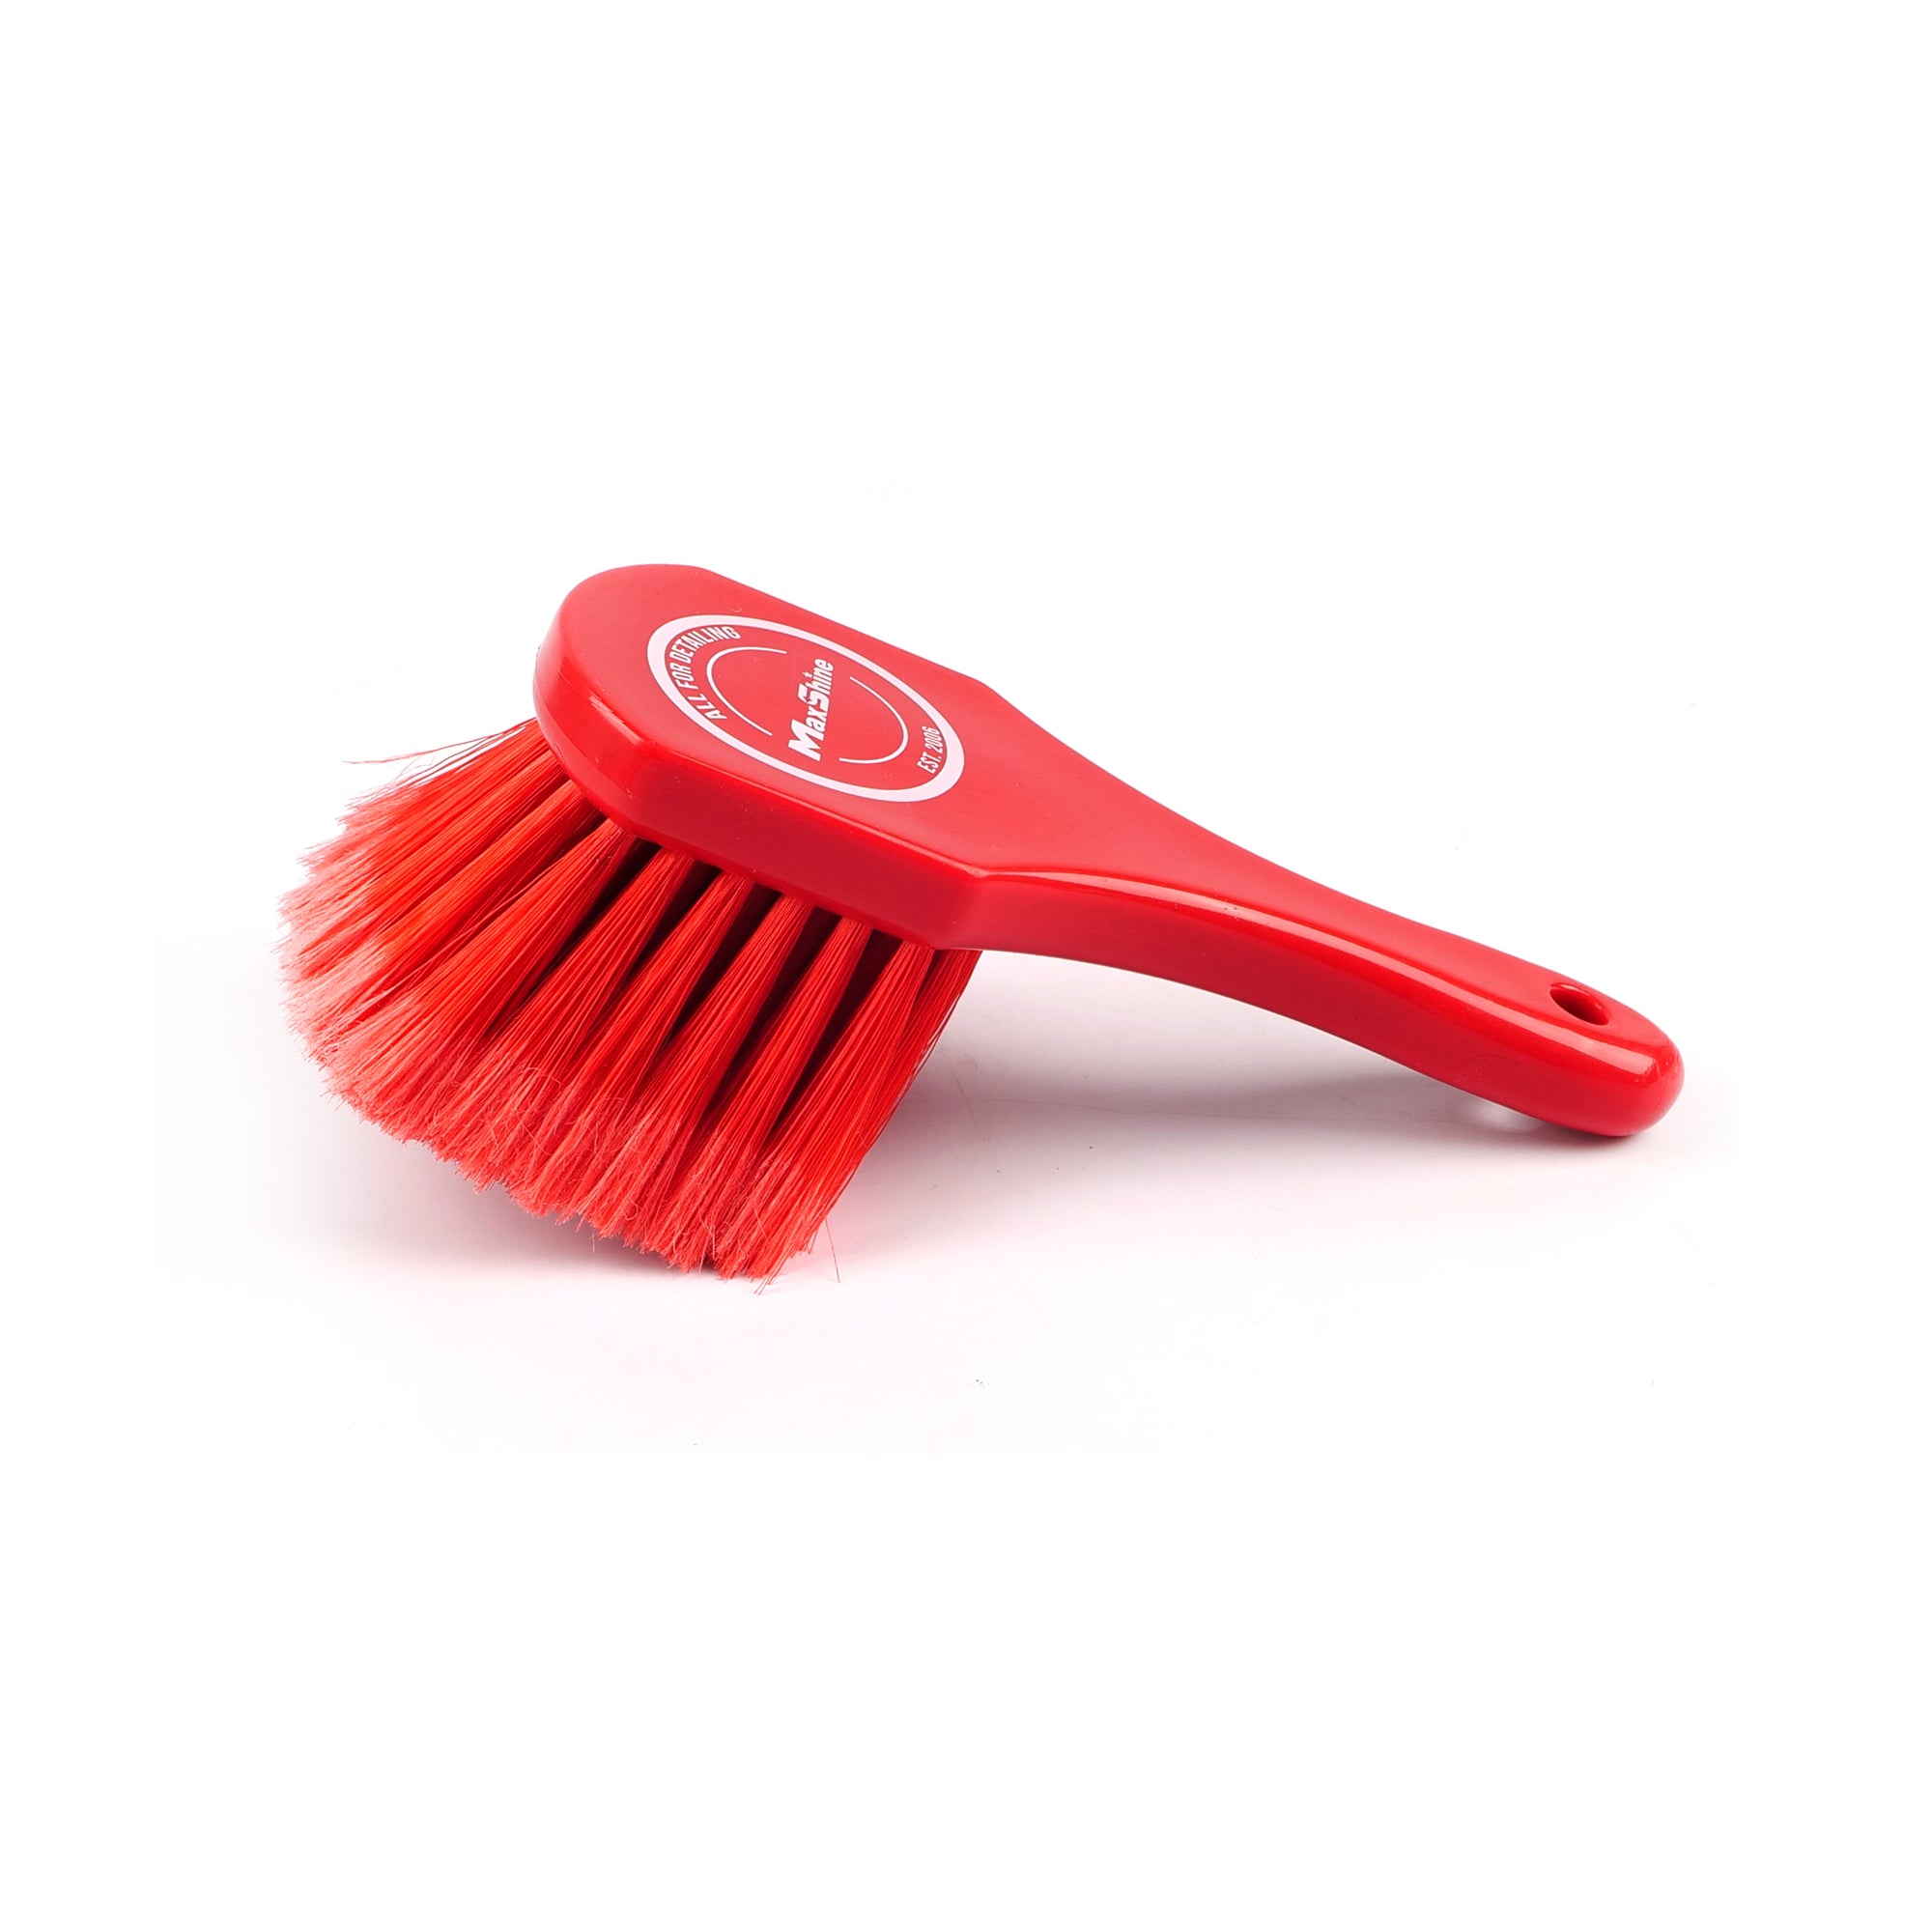 Exterior Surface and Wheel Cleaning Brush - MAXSHINE